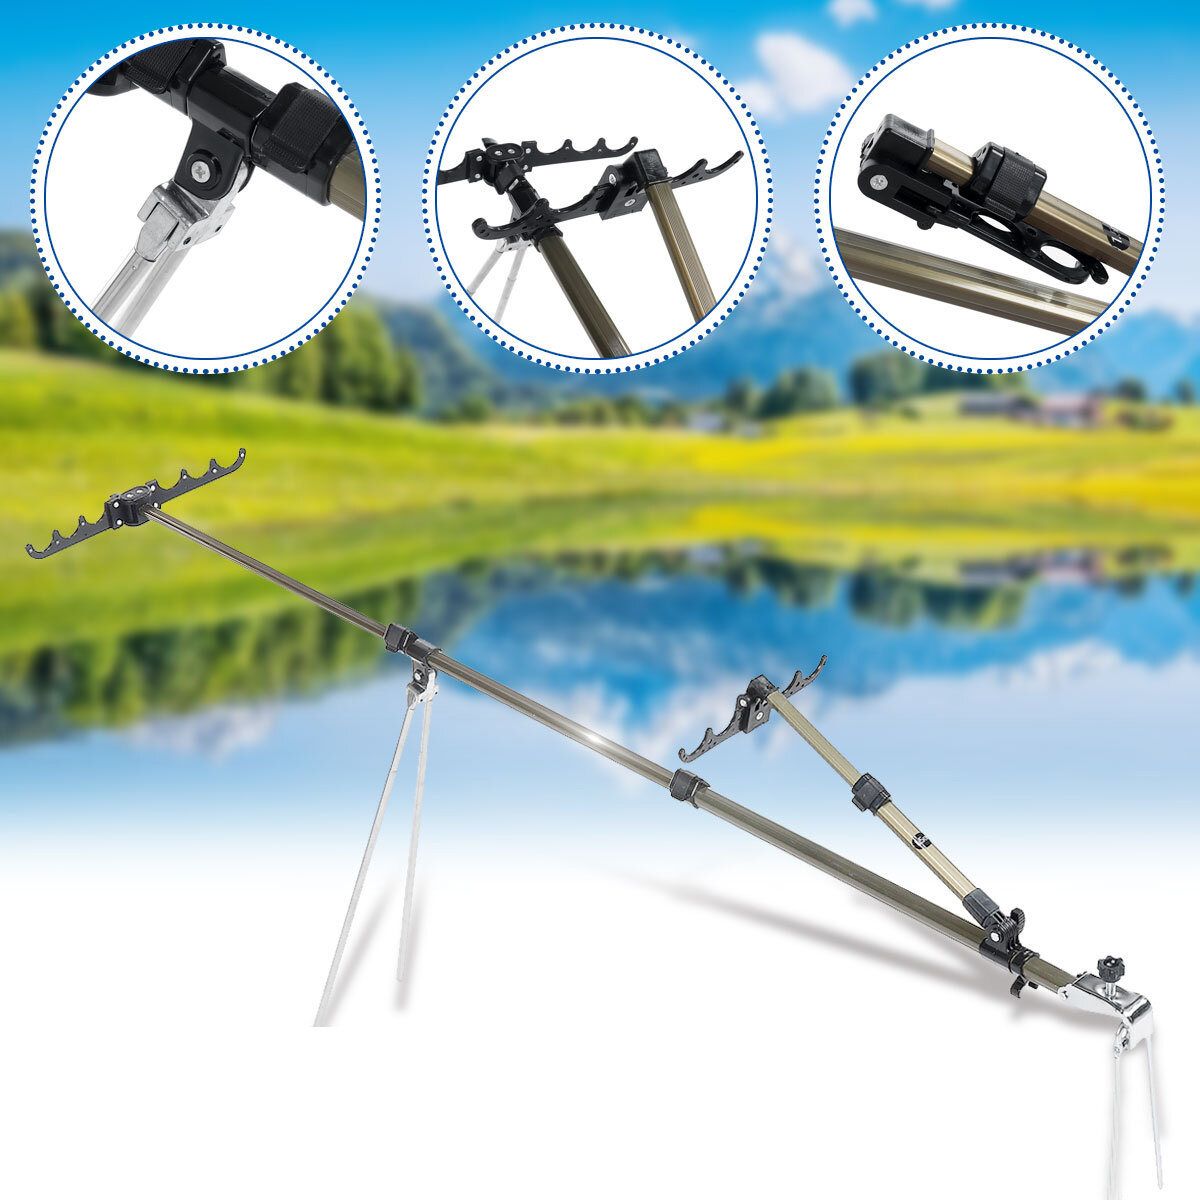 Aluminum Alloy Fishing Rod Holder Adjustable Retractable Fishing Pole Ground Stand Rod Bracket for Outdoor Fishing